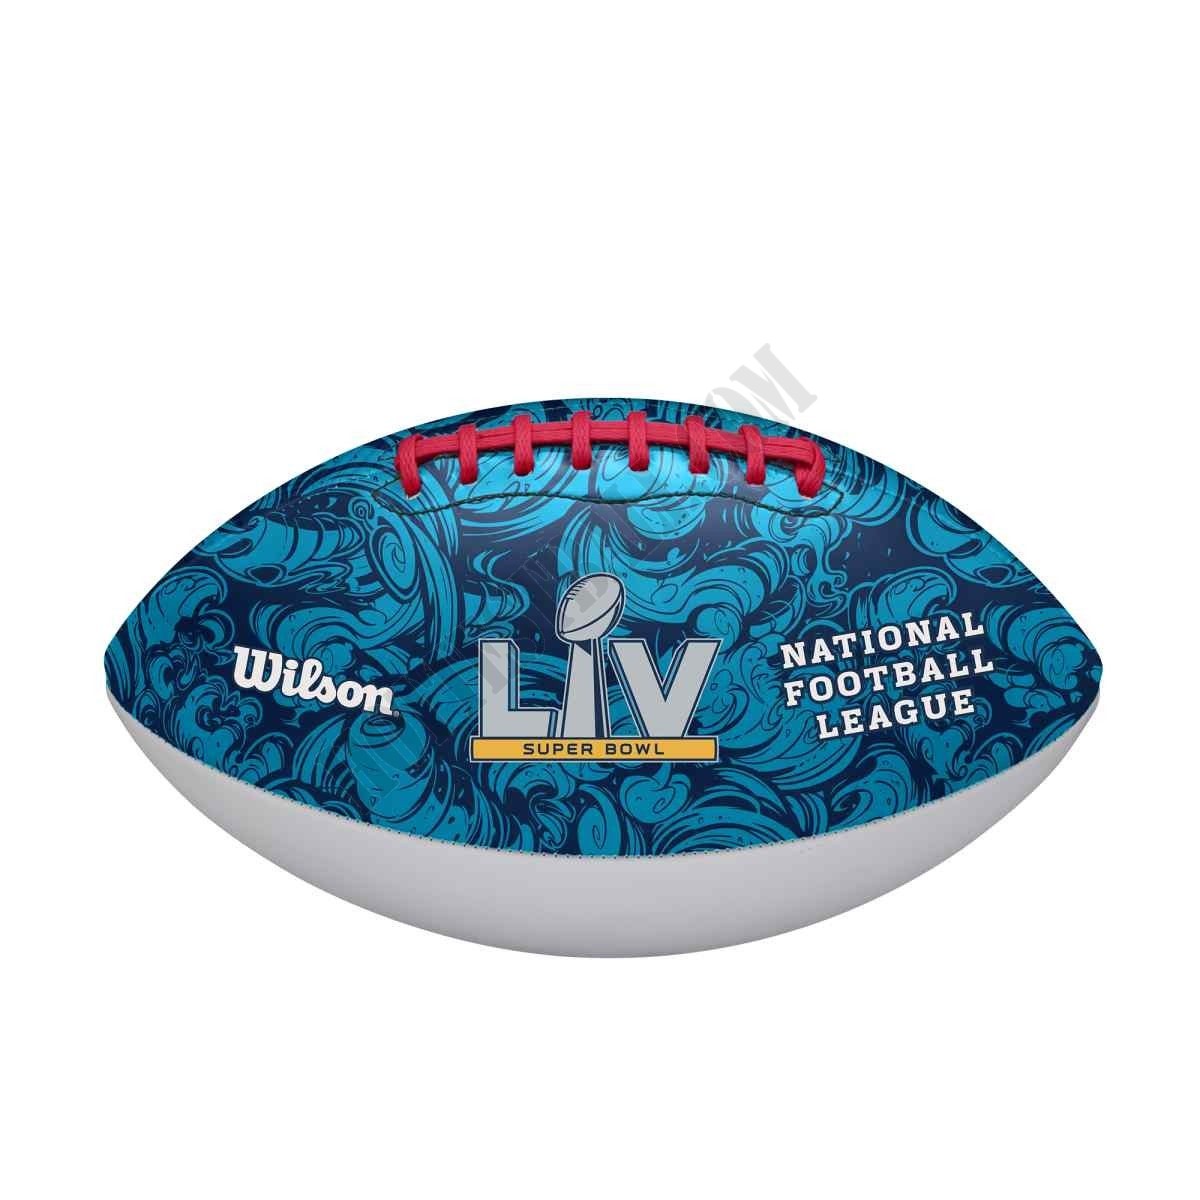 Super Bowl LV Official Autograph Football ● Wilson Promotions - -0